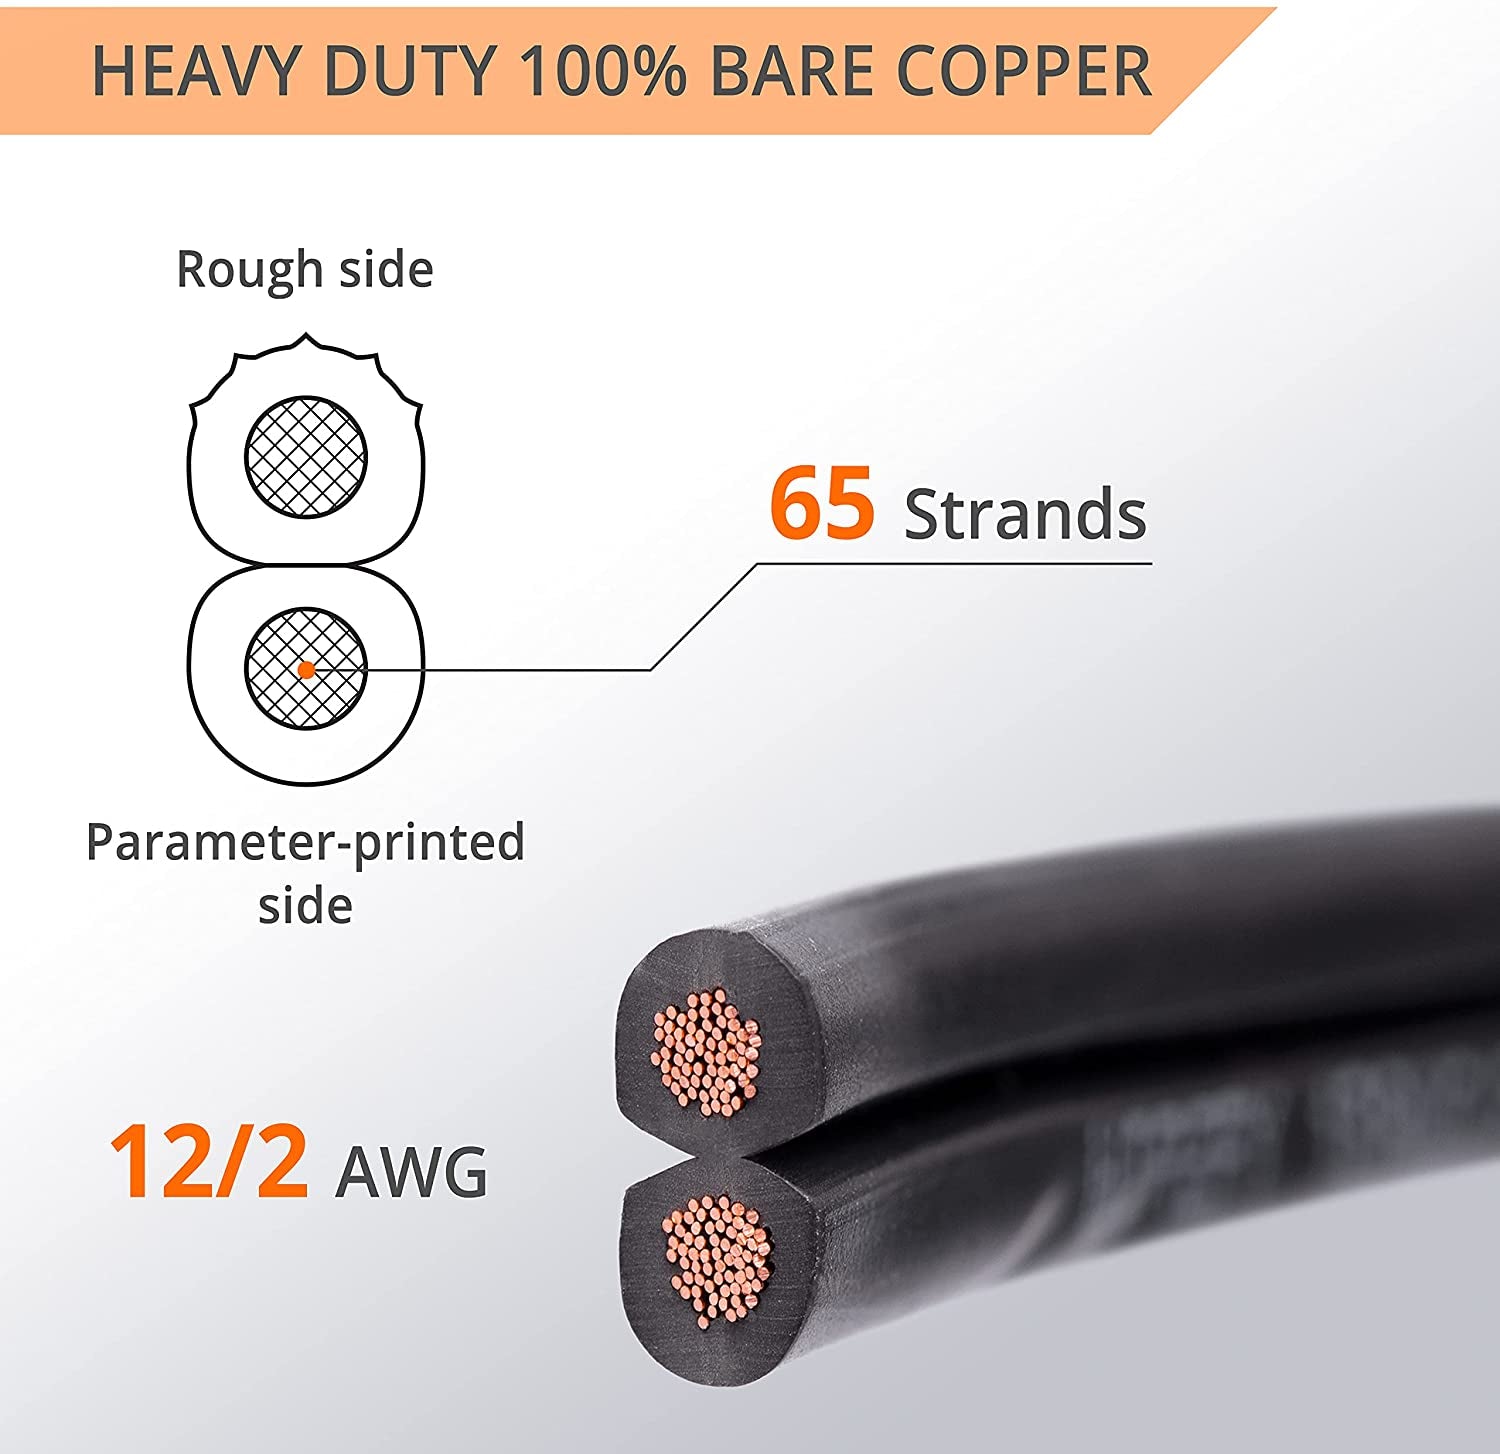 12/2 Low Voltage Landscape Lighting Copper Wire - Outdoor Direct Burial - 12-Gauge 2-Conductor 250 Feet